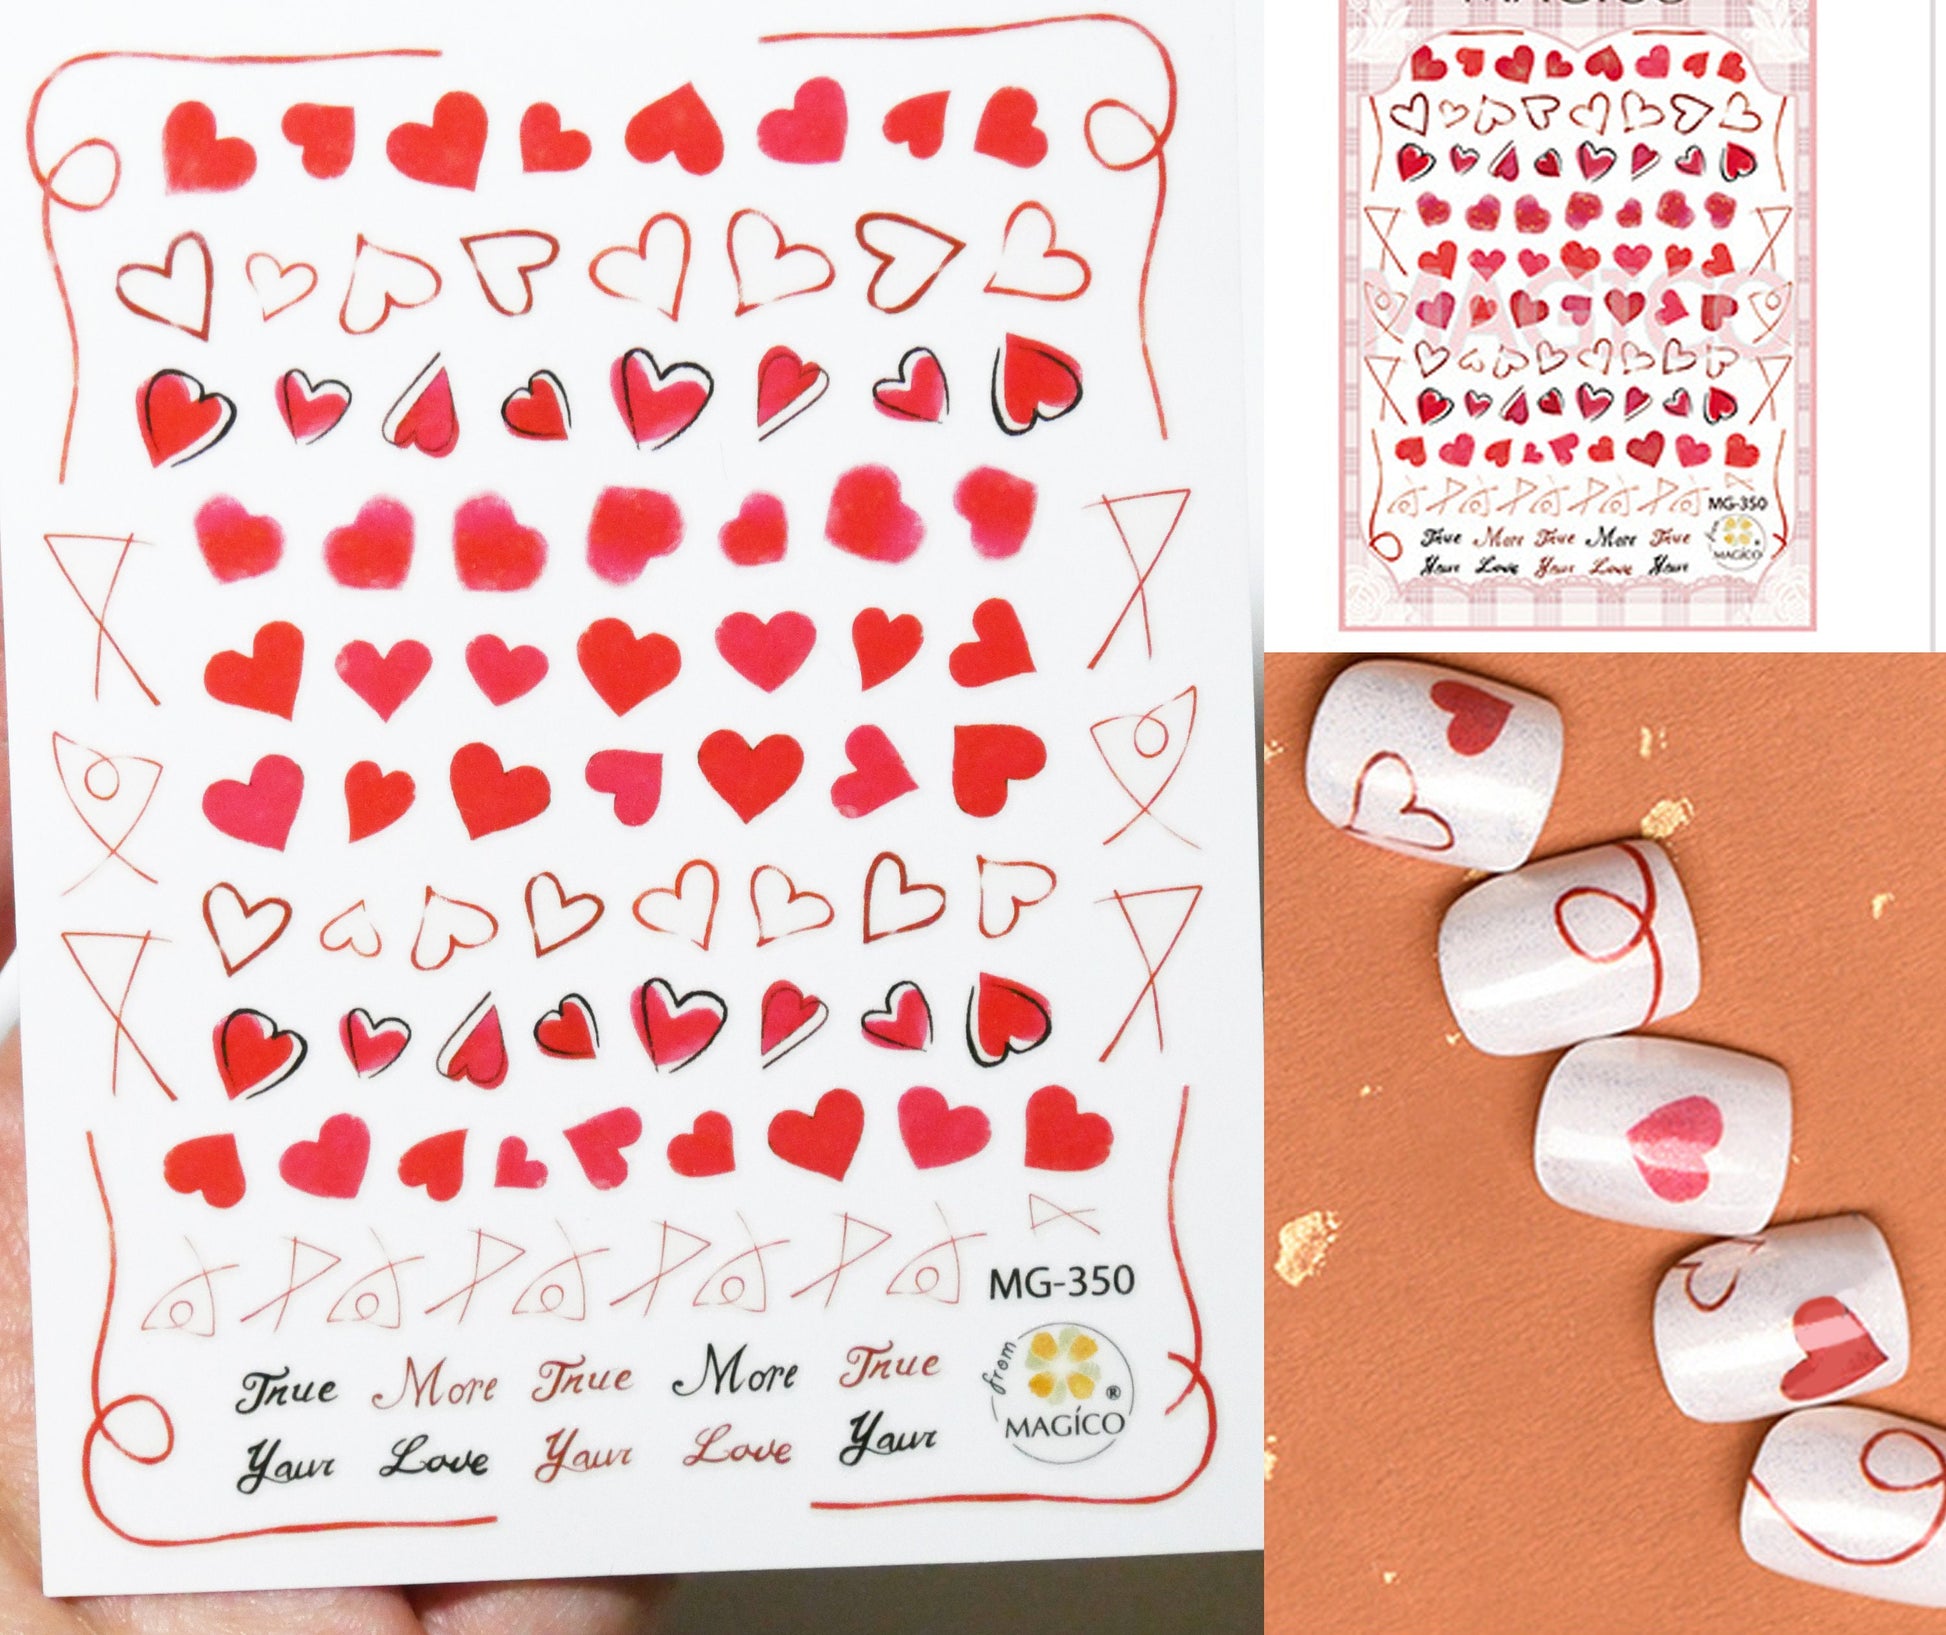 Red Heart Nail Sticker/ Sweet love Nail Art Stickers Self Adhesive Decals/Red Ribbon nail art sticker/ Valentine's Day nail decal